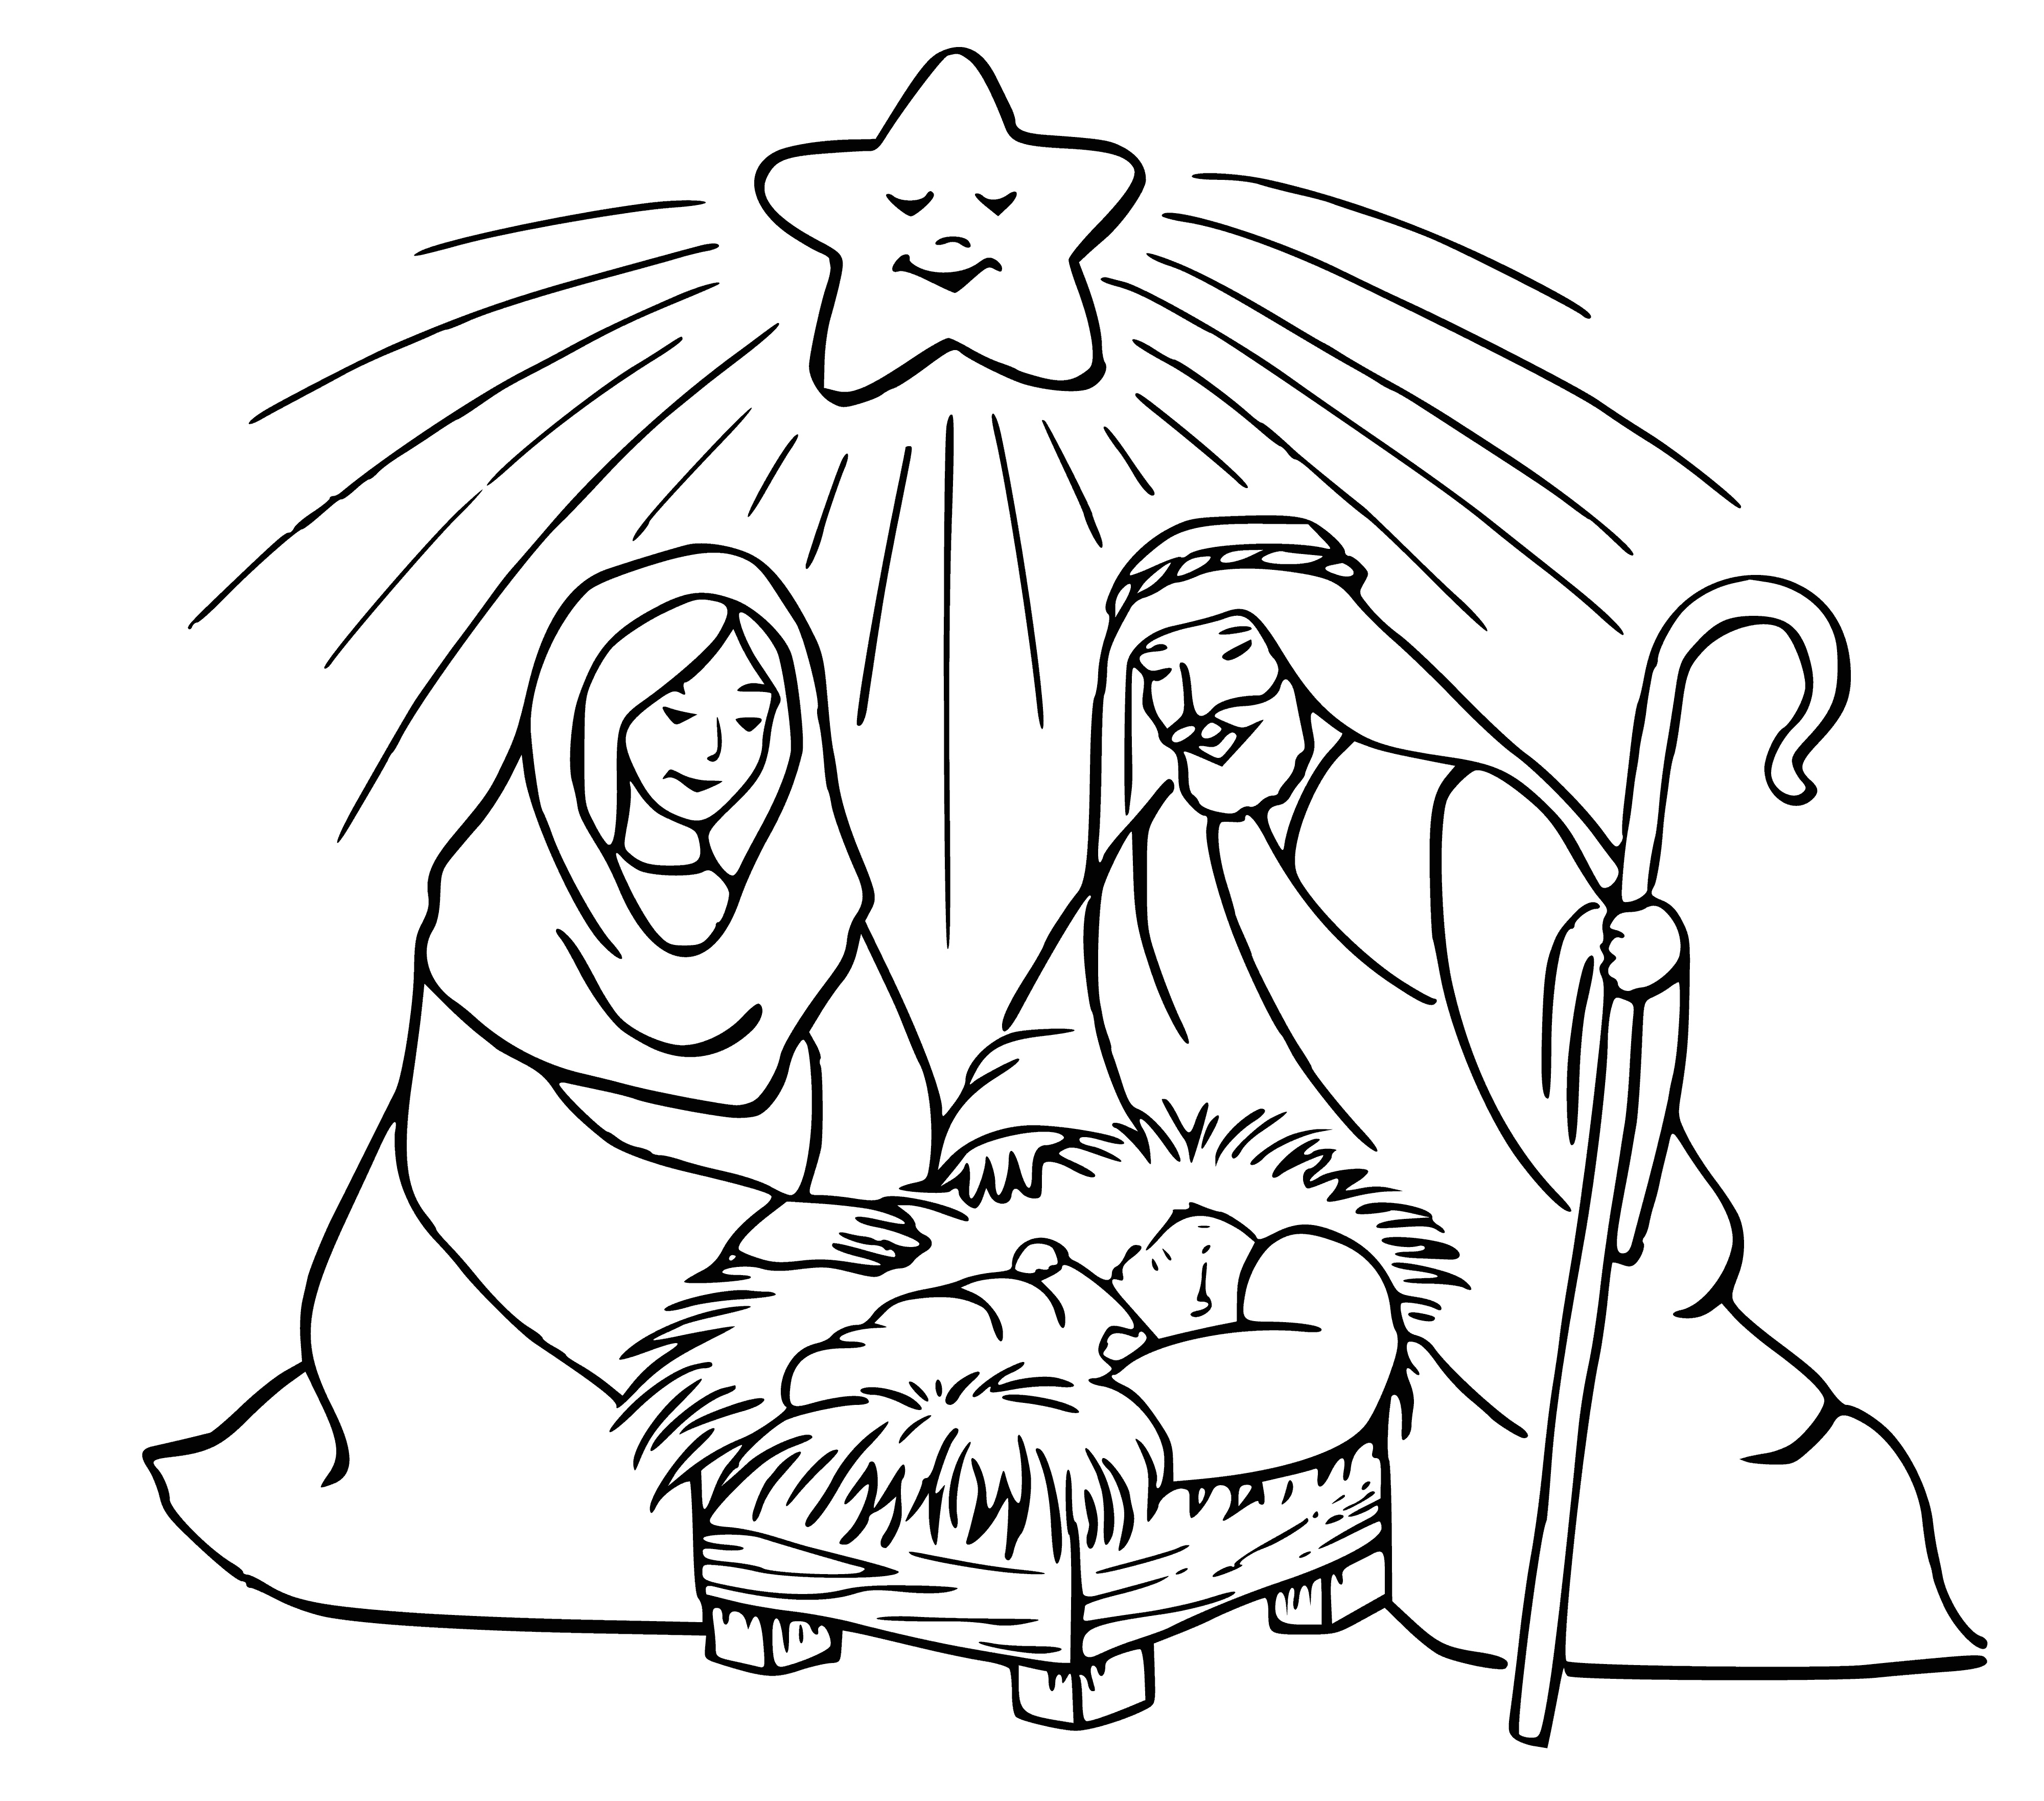 Jesus born in a stable, wrapped in swaddling clothes, & laid in a manger with an angel & shepherds present.